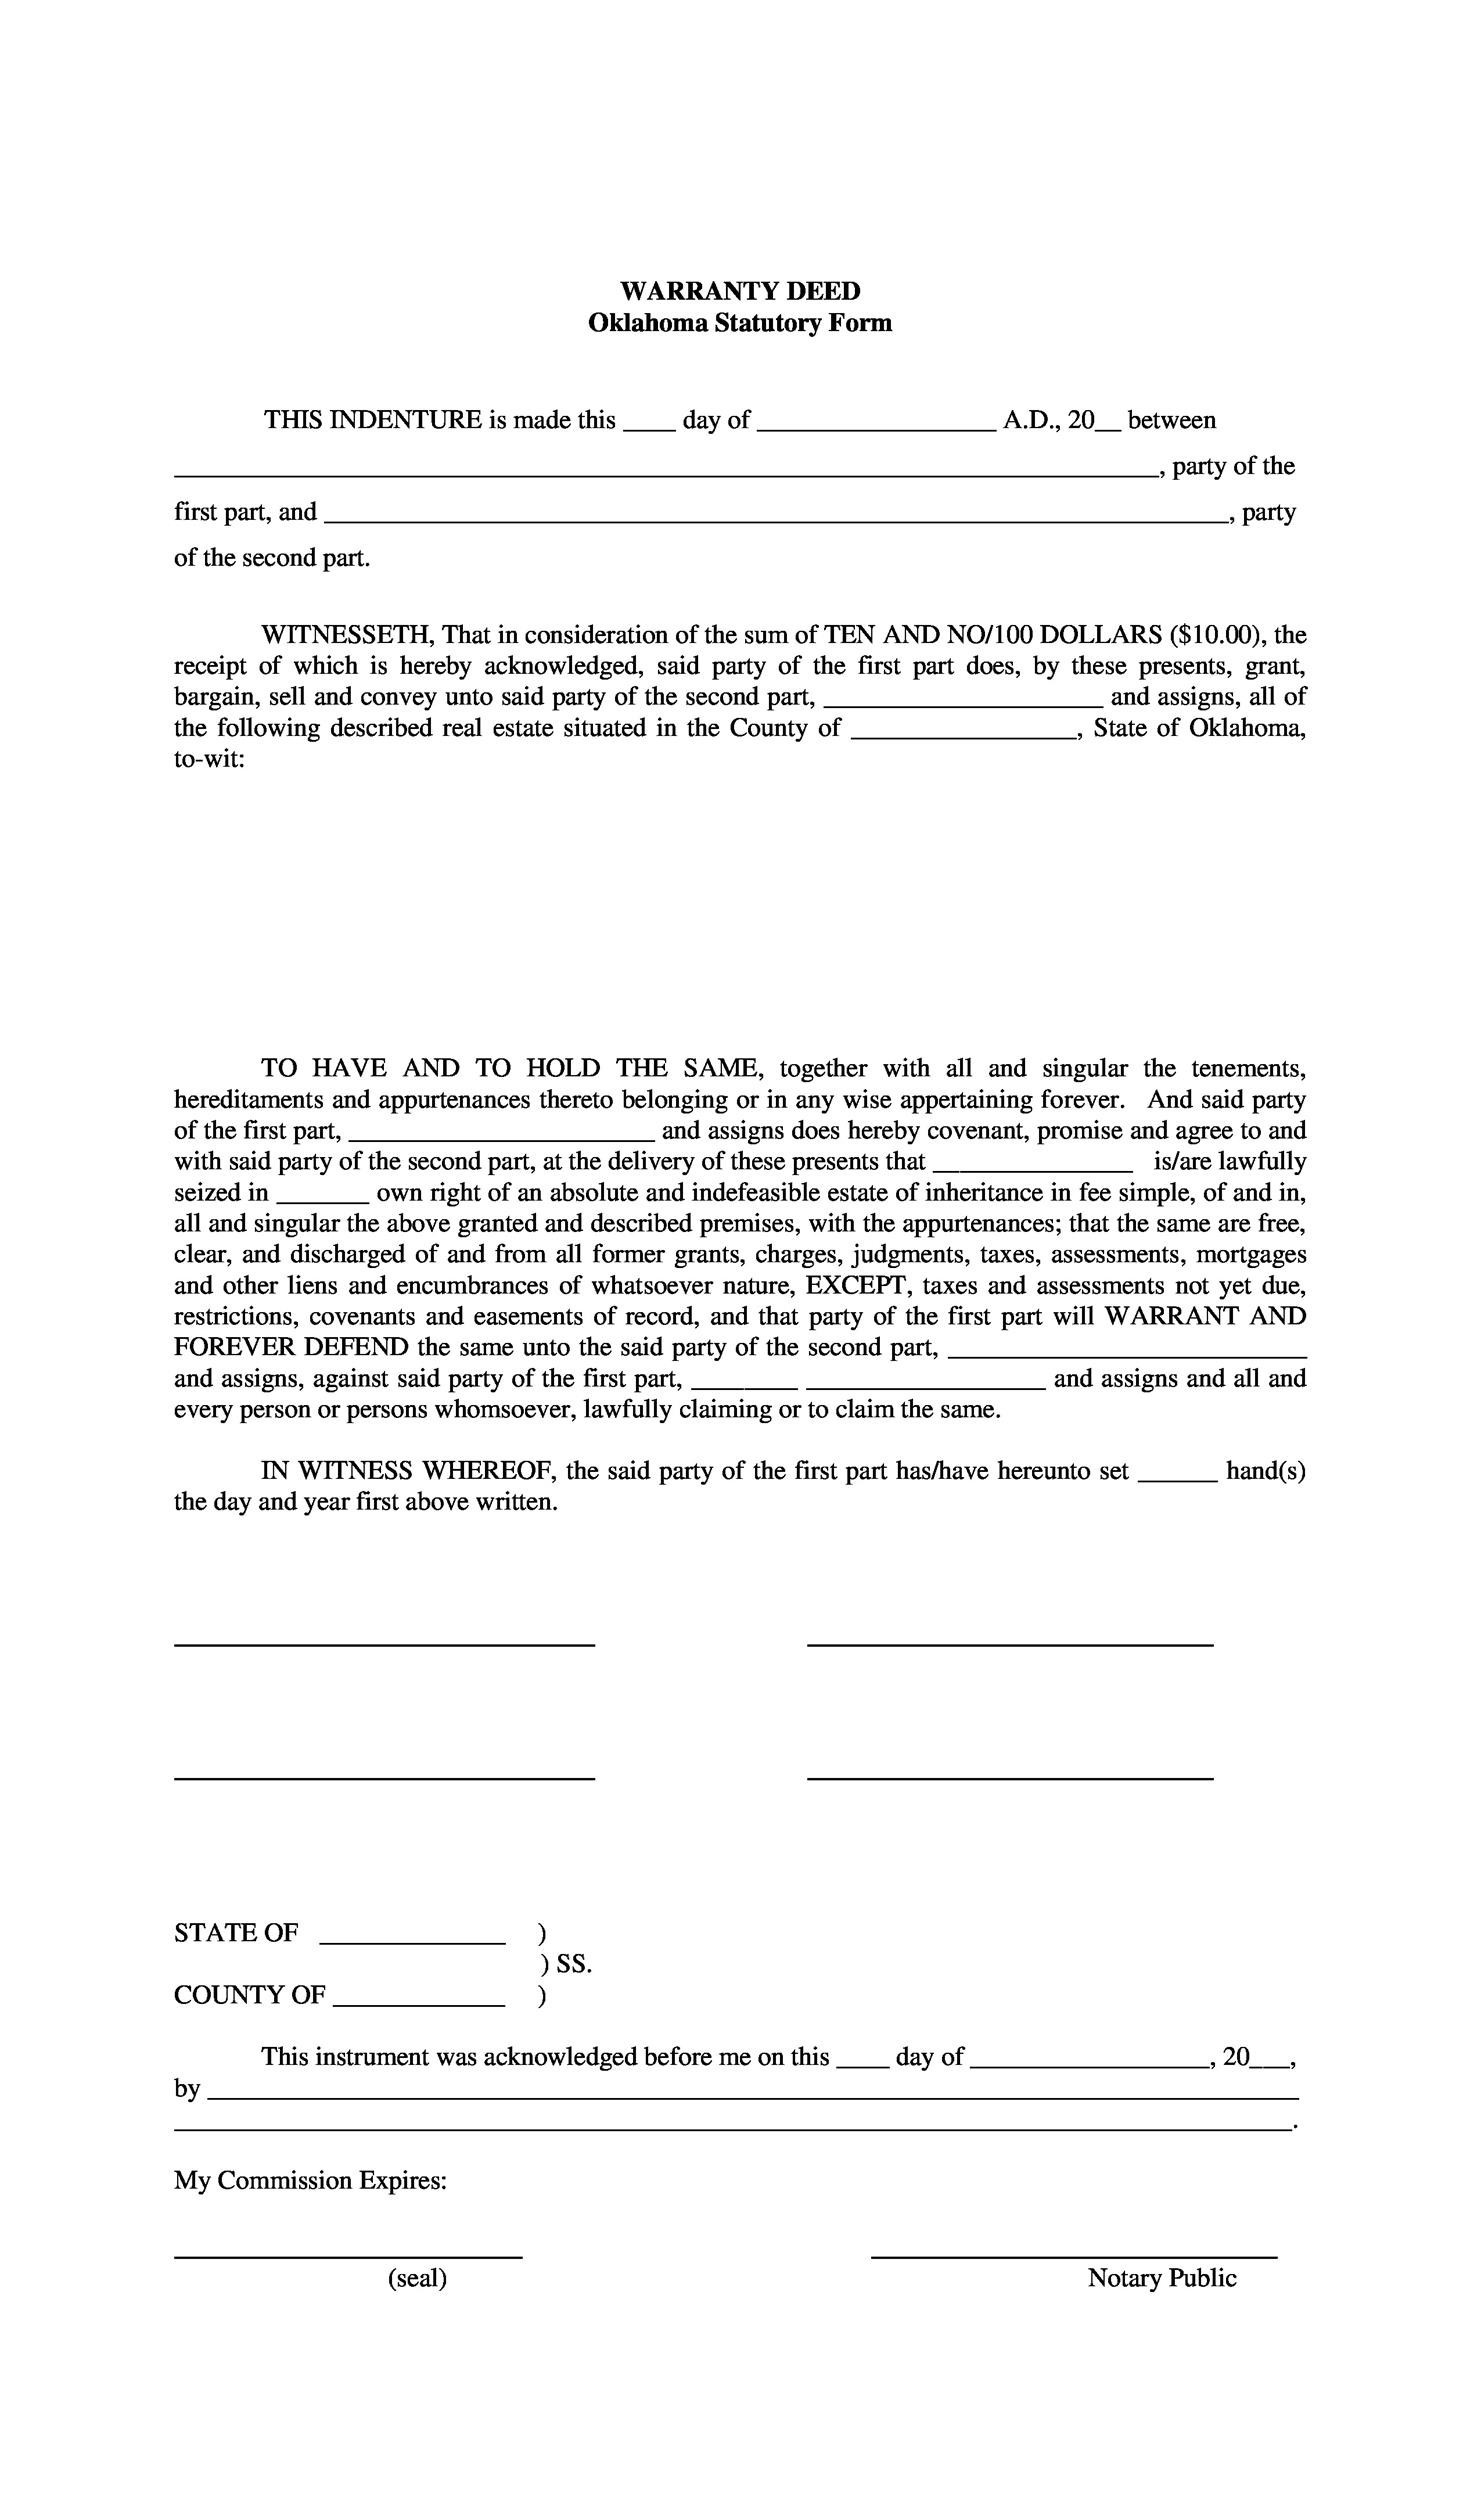 printable-warranty-deed-form-printable-forms-free-online